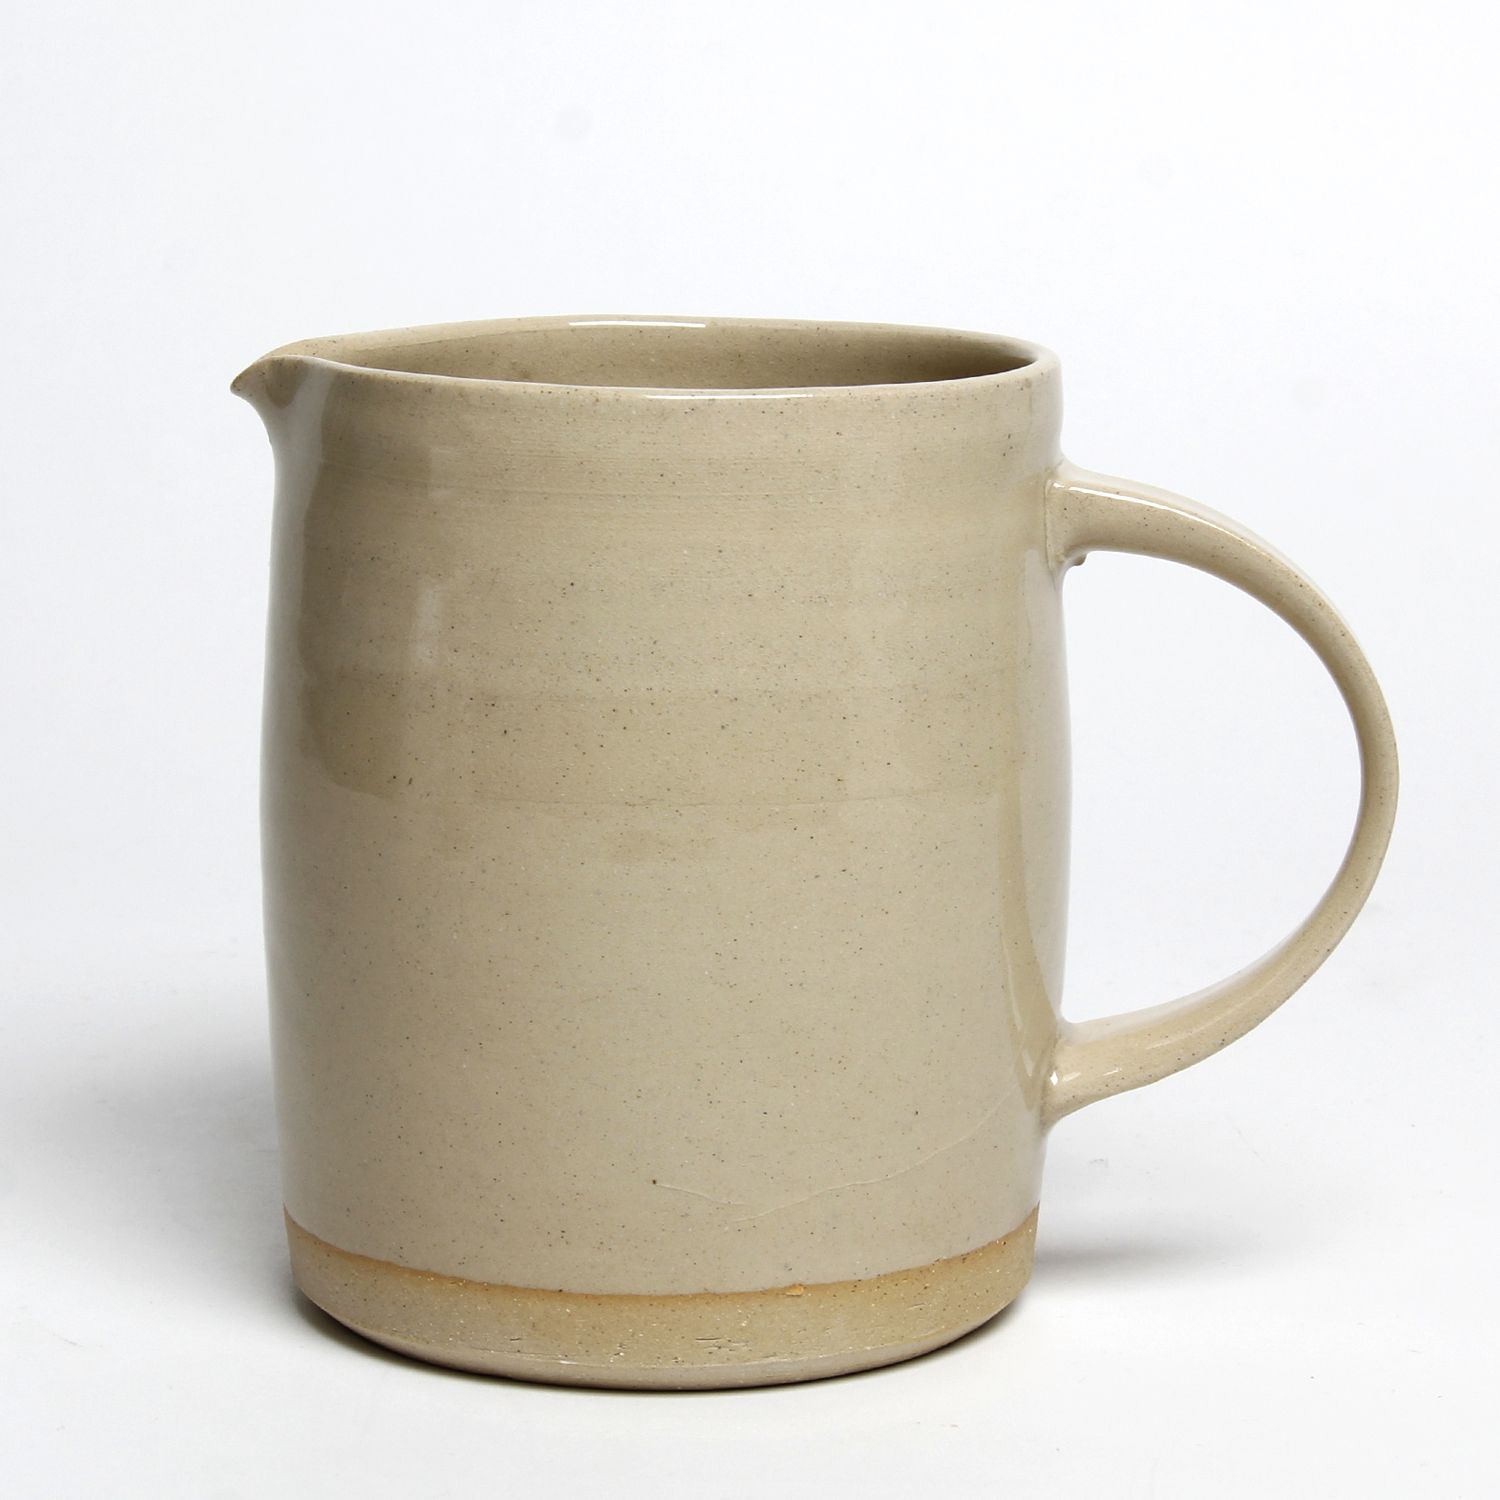 Suzanne Morrisette: Wet Pebble Pitcher Product Image 1 of 2